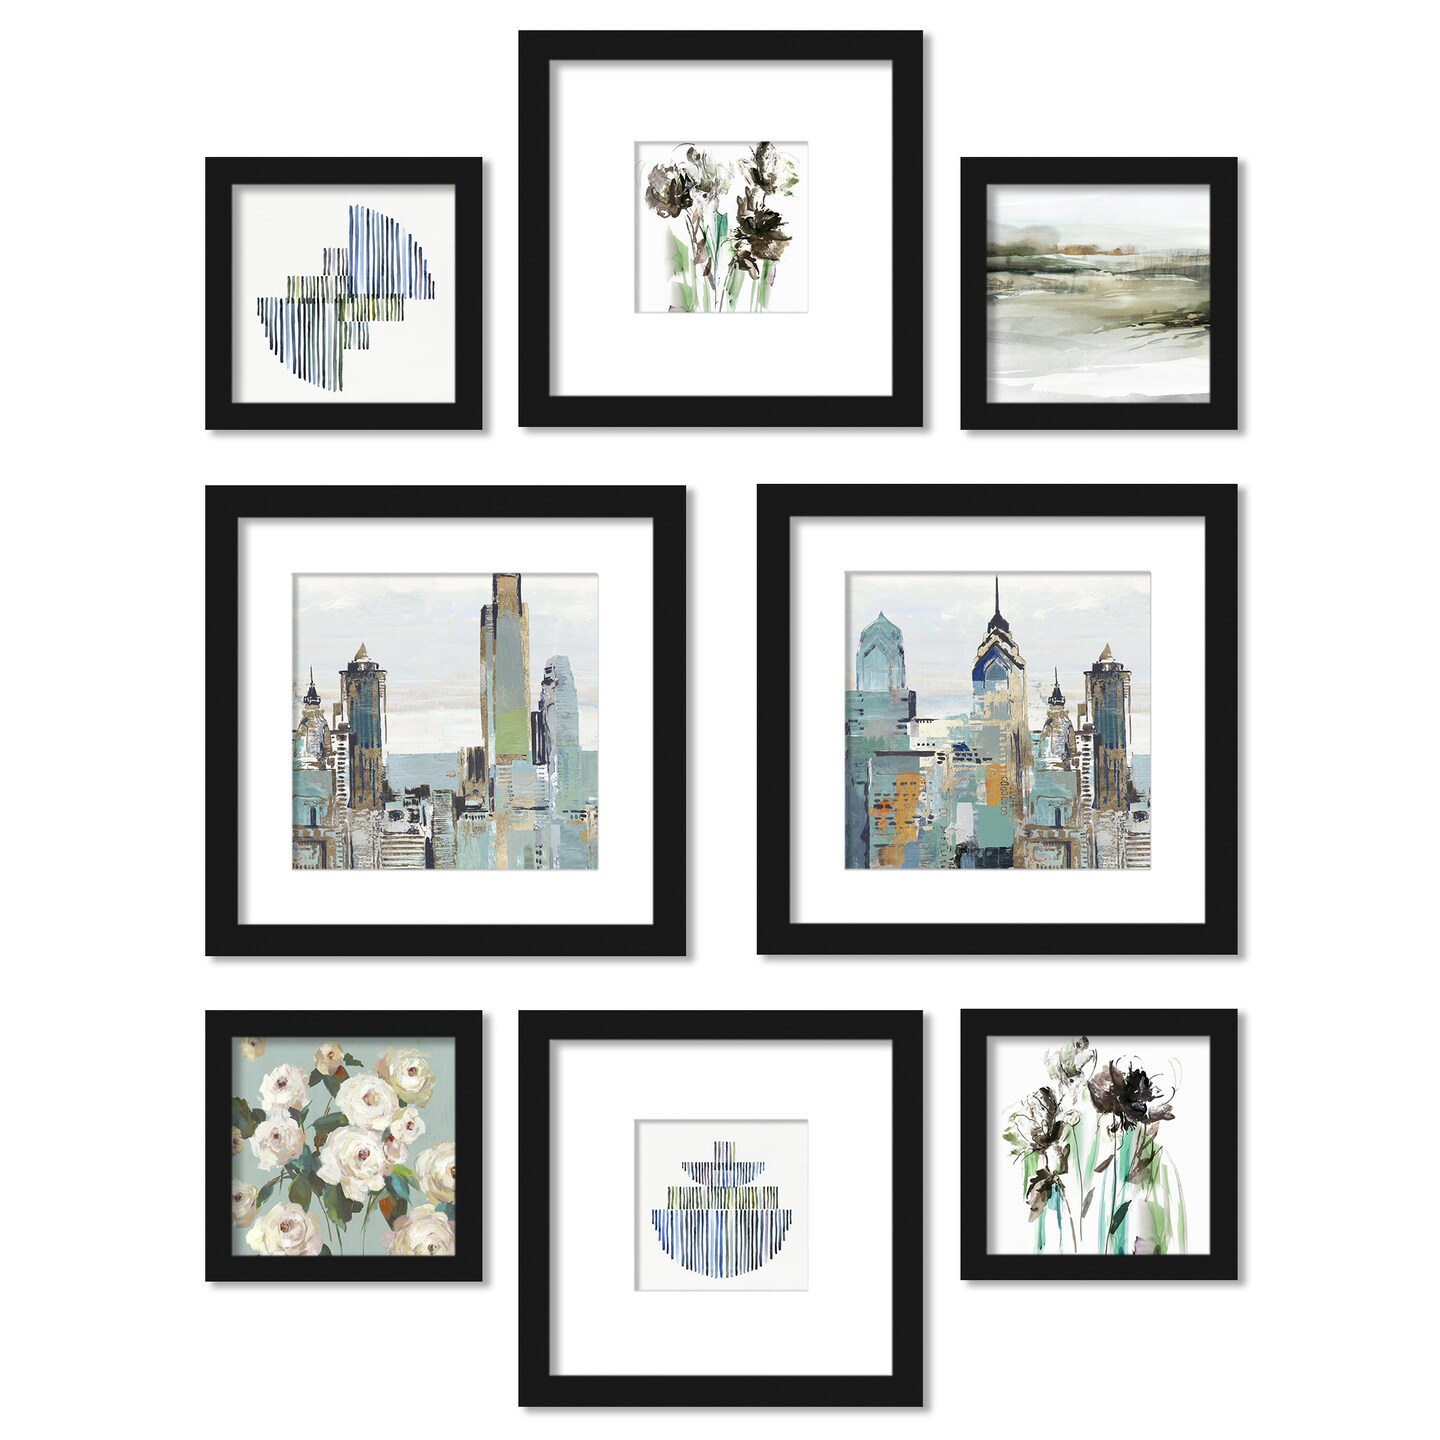 Americanflat New York City In Bloom 8 Piece Framed Gallery Wall Art Set